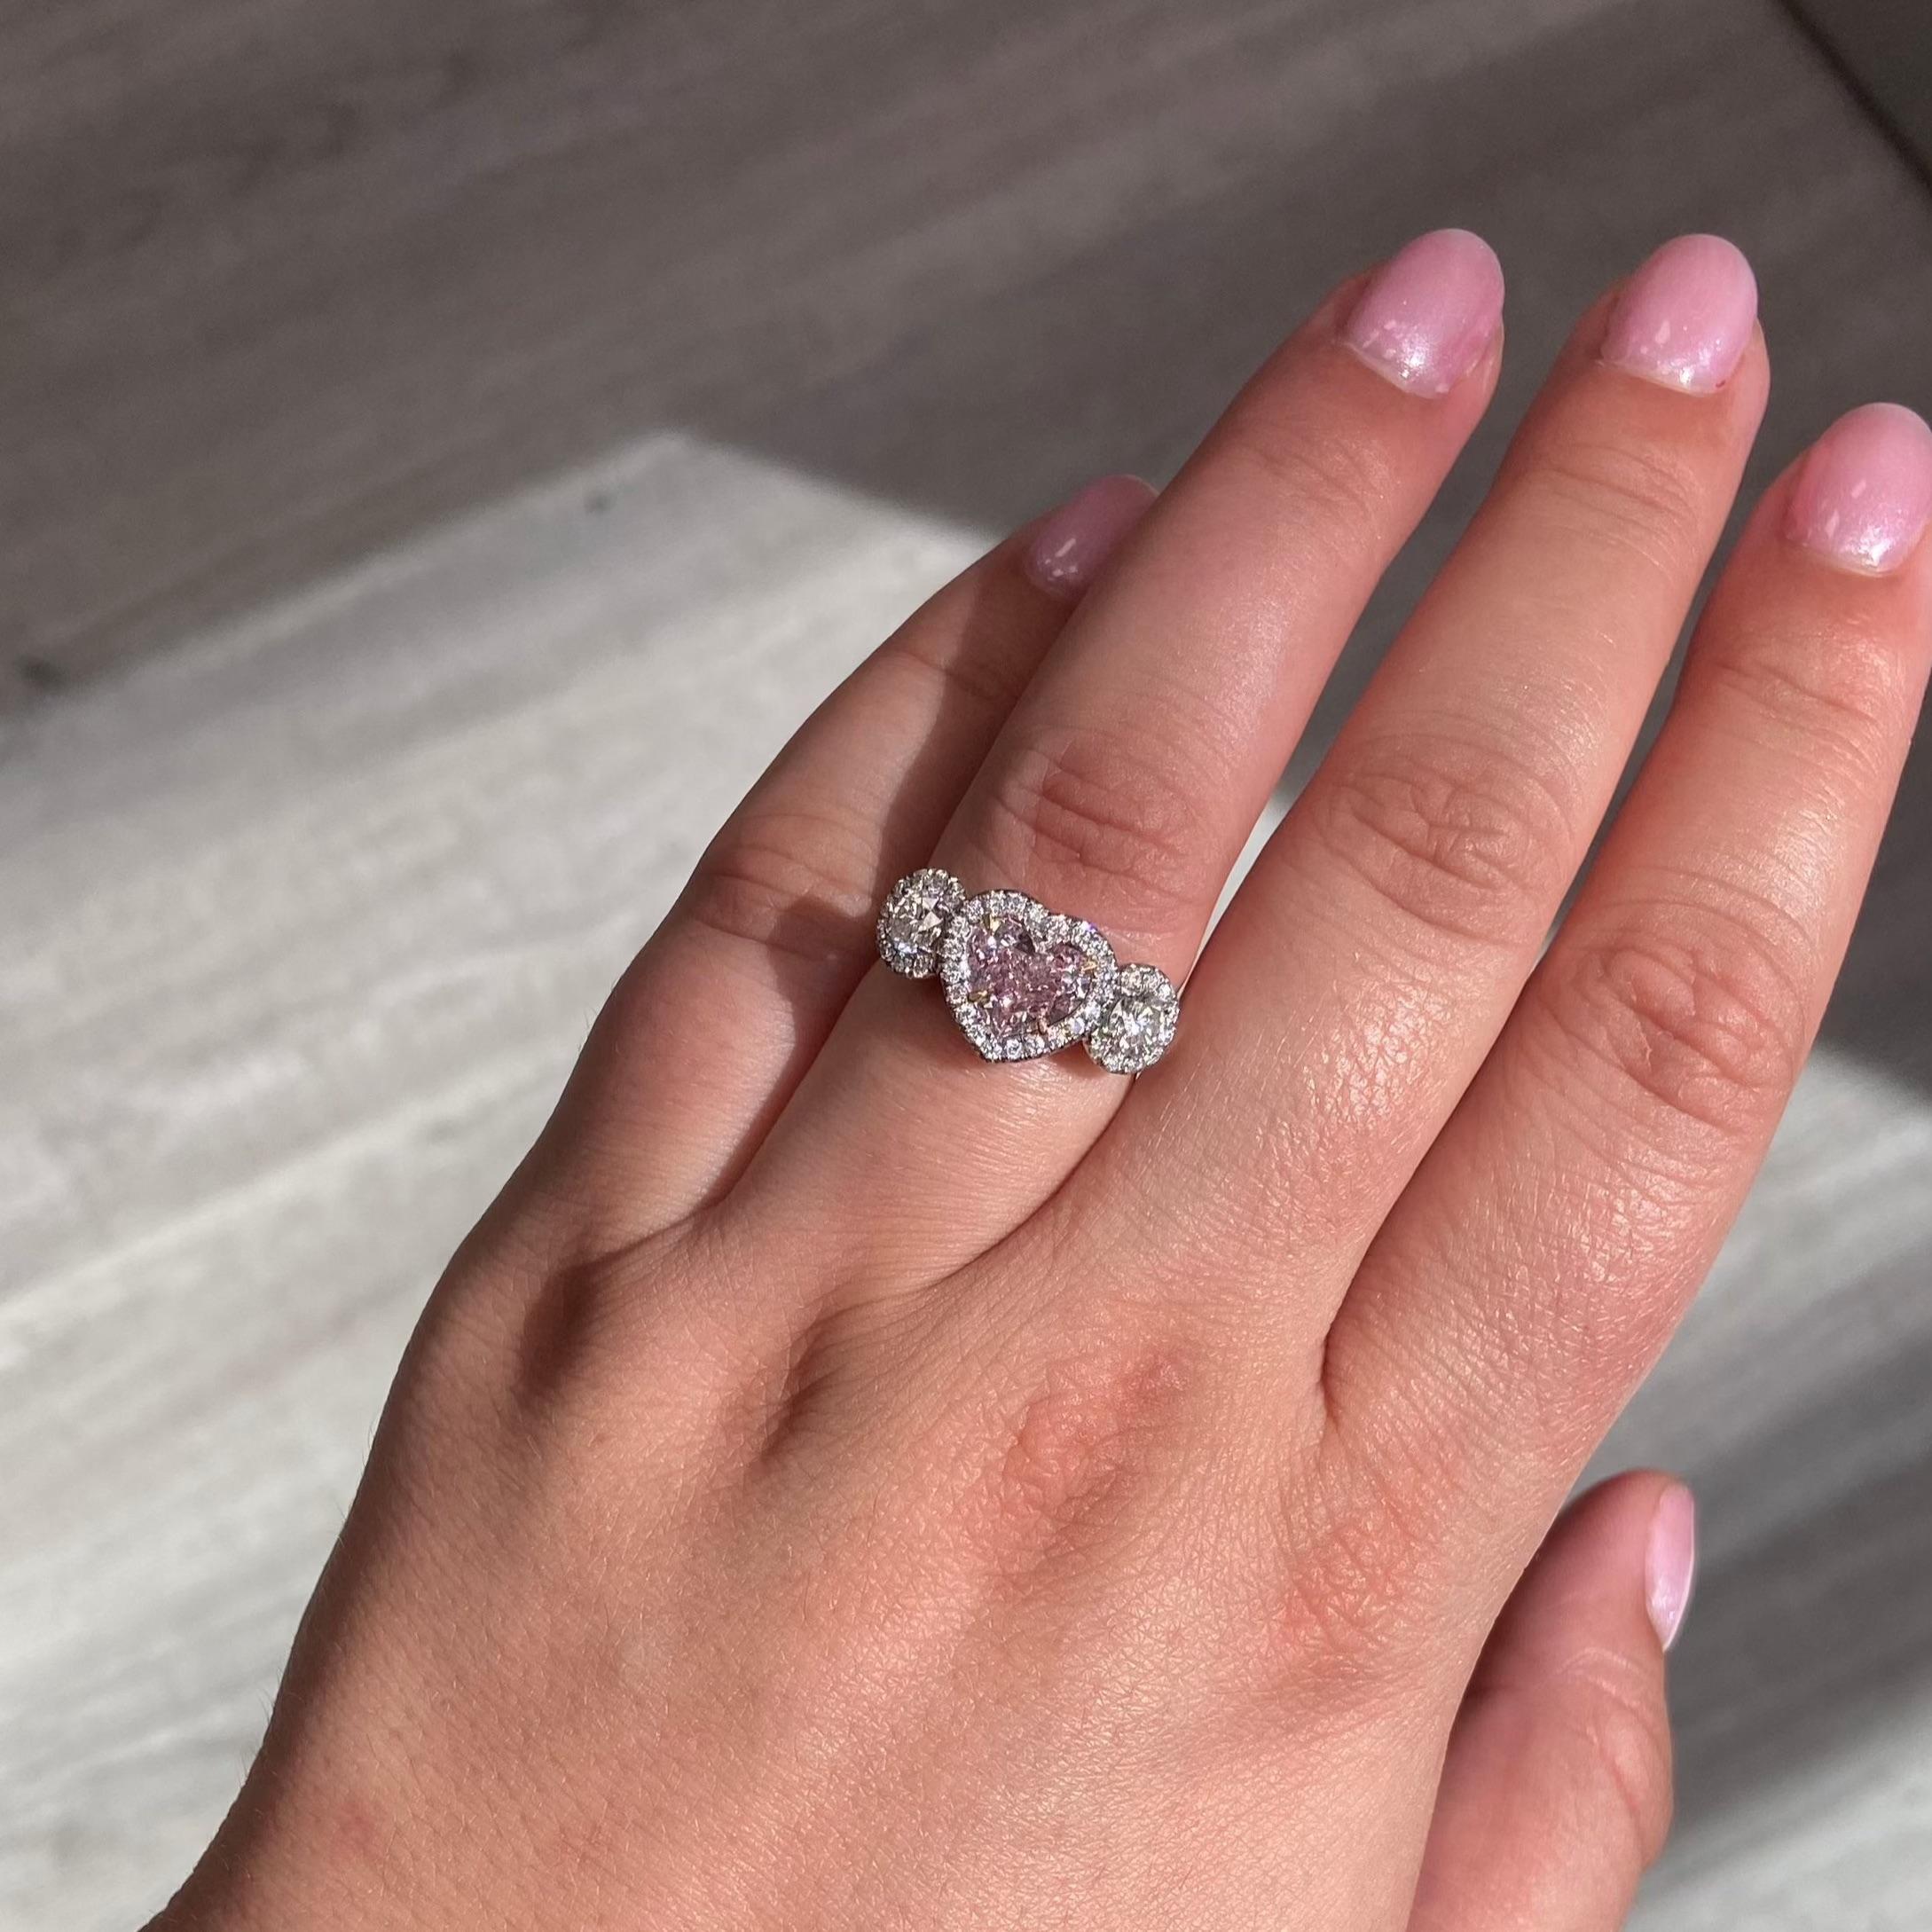 1.37 Carat Light Pink Heart Shape Diamond
SI1 Clarity 100% eye clean
No fluorescence
Platinum Ring set with 2 white diamond round side stones and soft white diamond halos
This piece can be viewed before purchase in our showroom in NYC or at one of